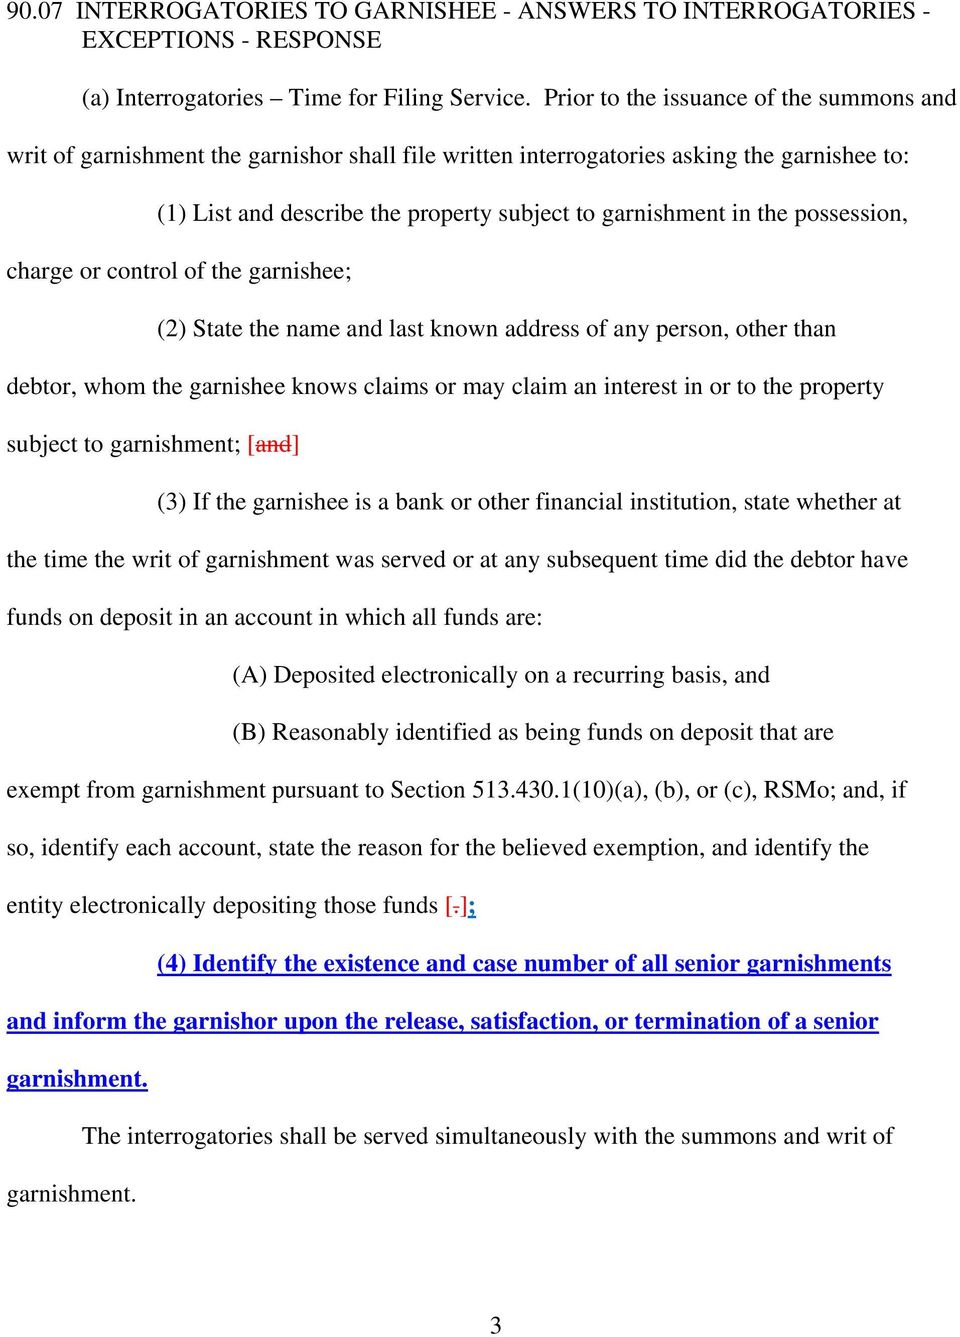 possession, charge or control of the garnishee; (2) State the name and last known address of any person, other than debtor, whom the garnishee knows claims or may claim an interest in or to the